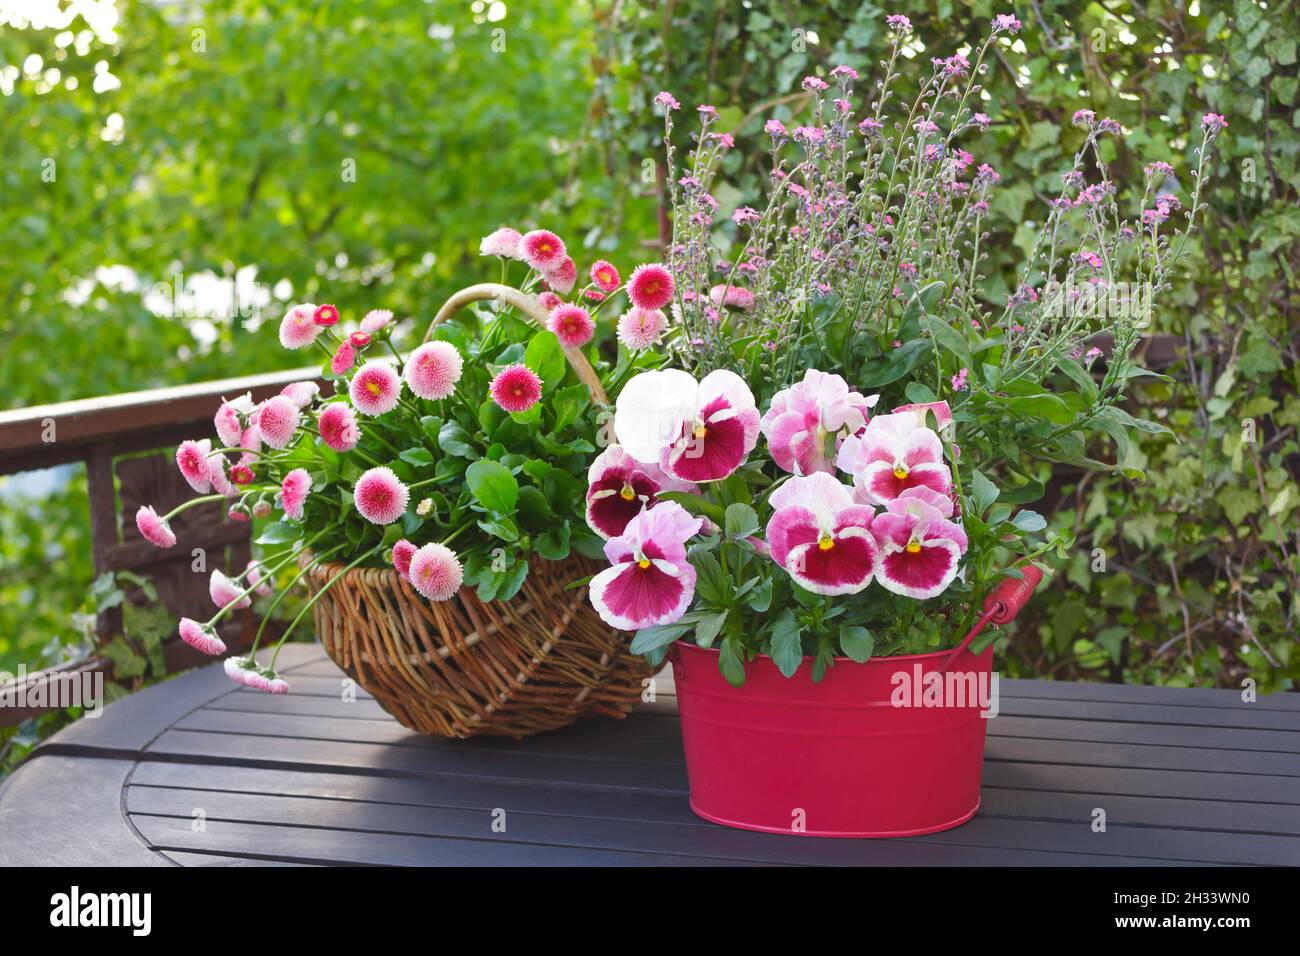 Garden pansy flowers and forget-me-not in a red pot and pink daisies in a basket on a balcony table, spring background texture. Stock Photo